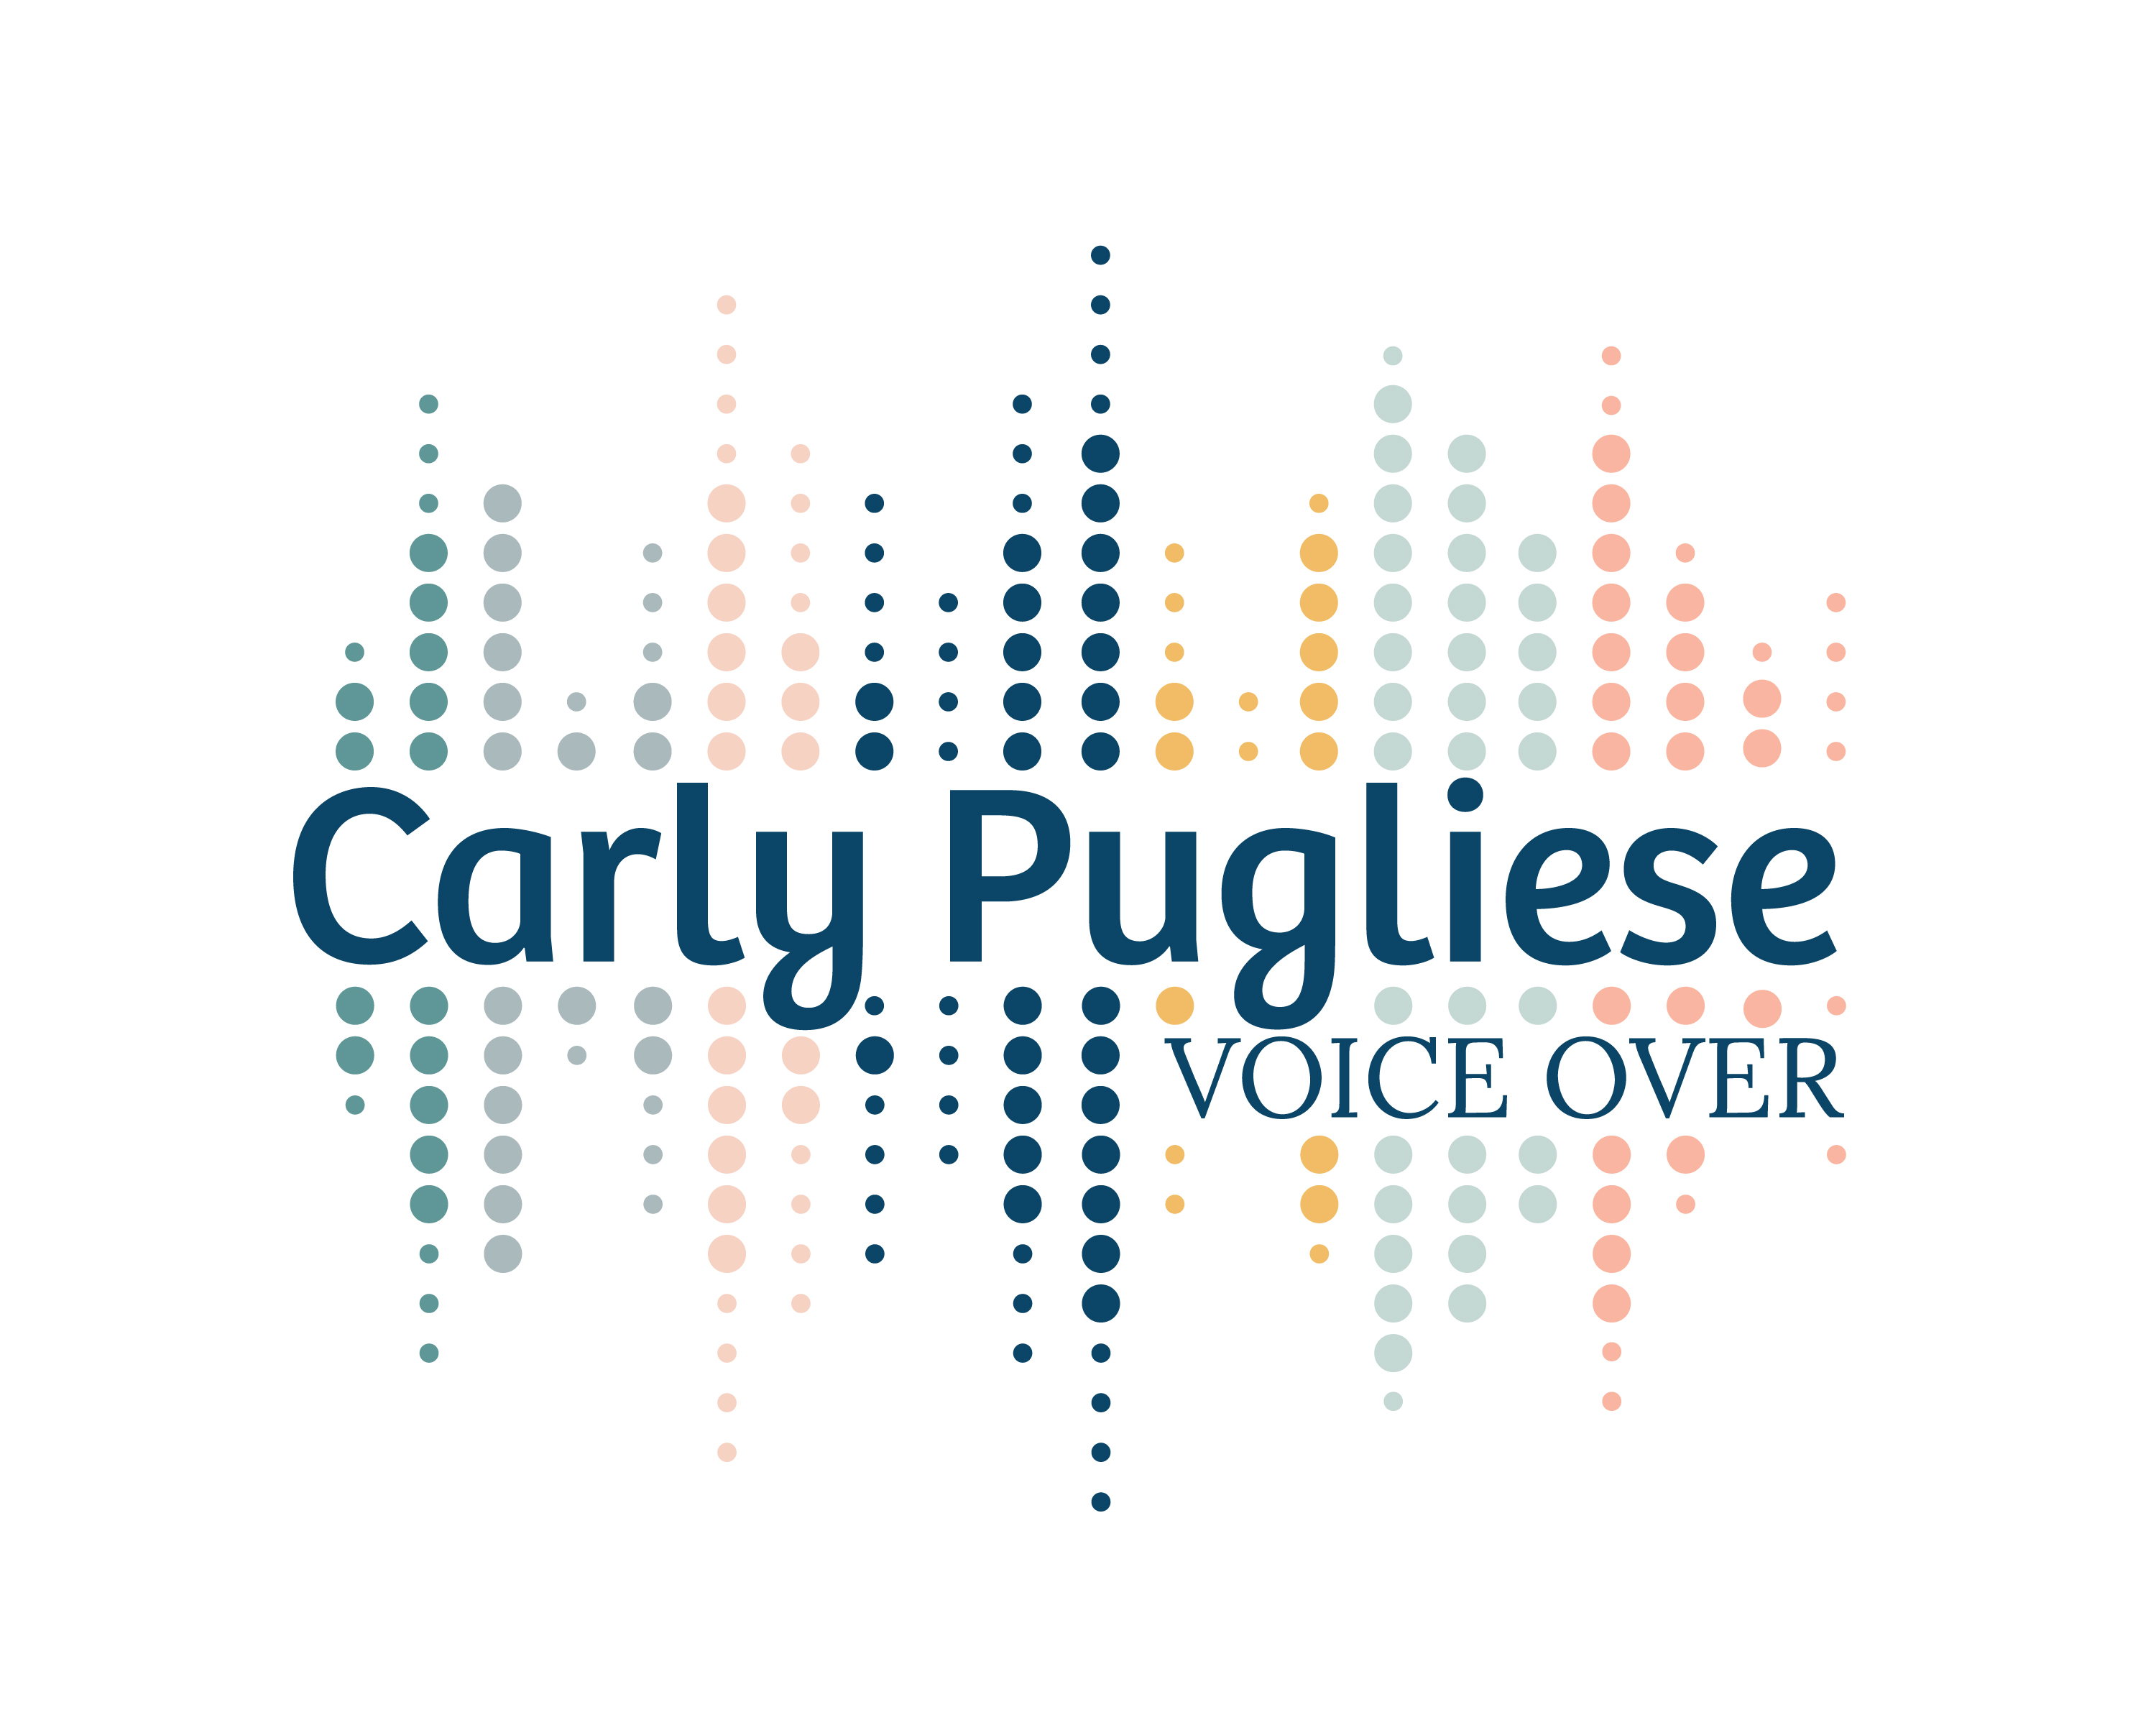 Carly Pugliese Voice Over